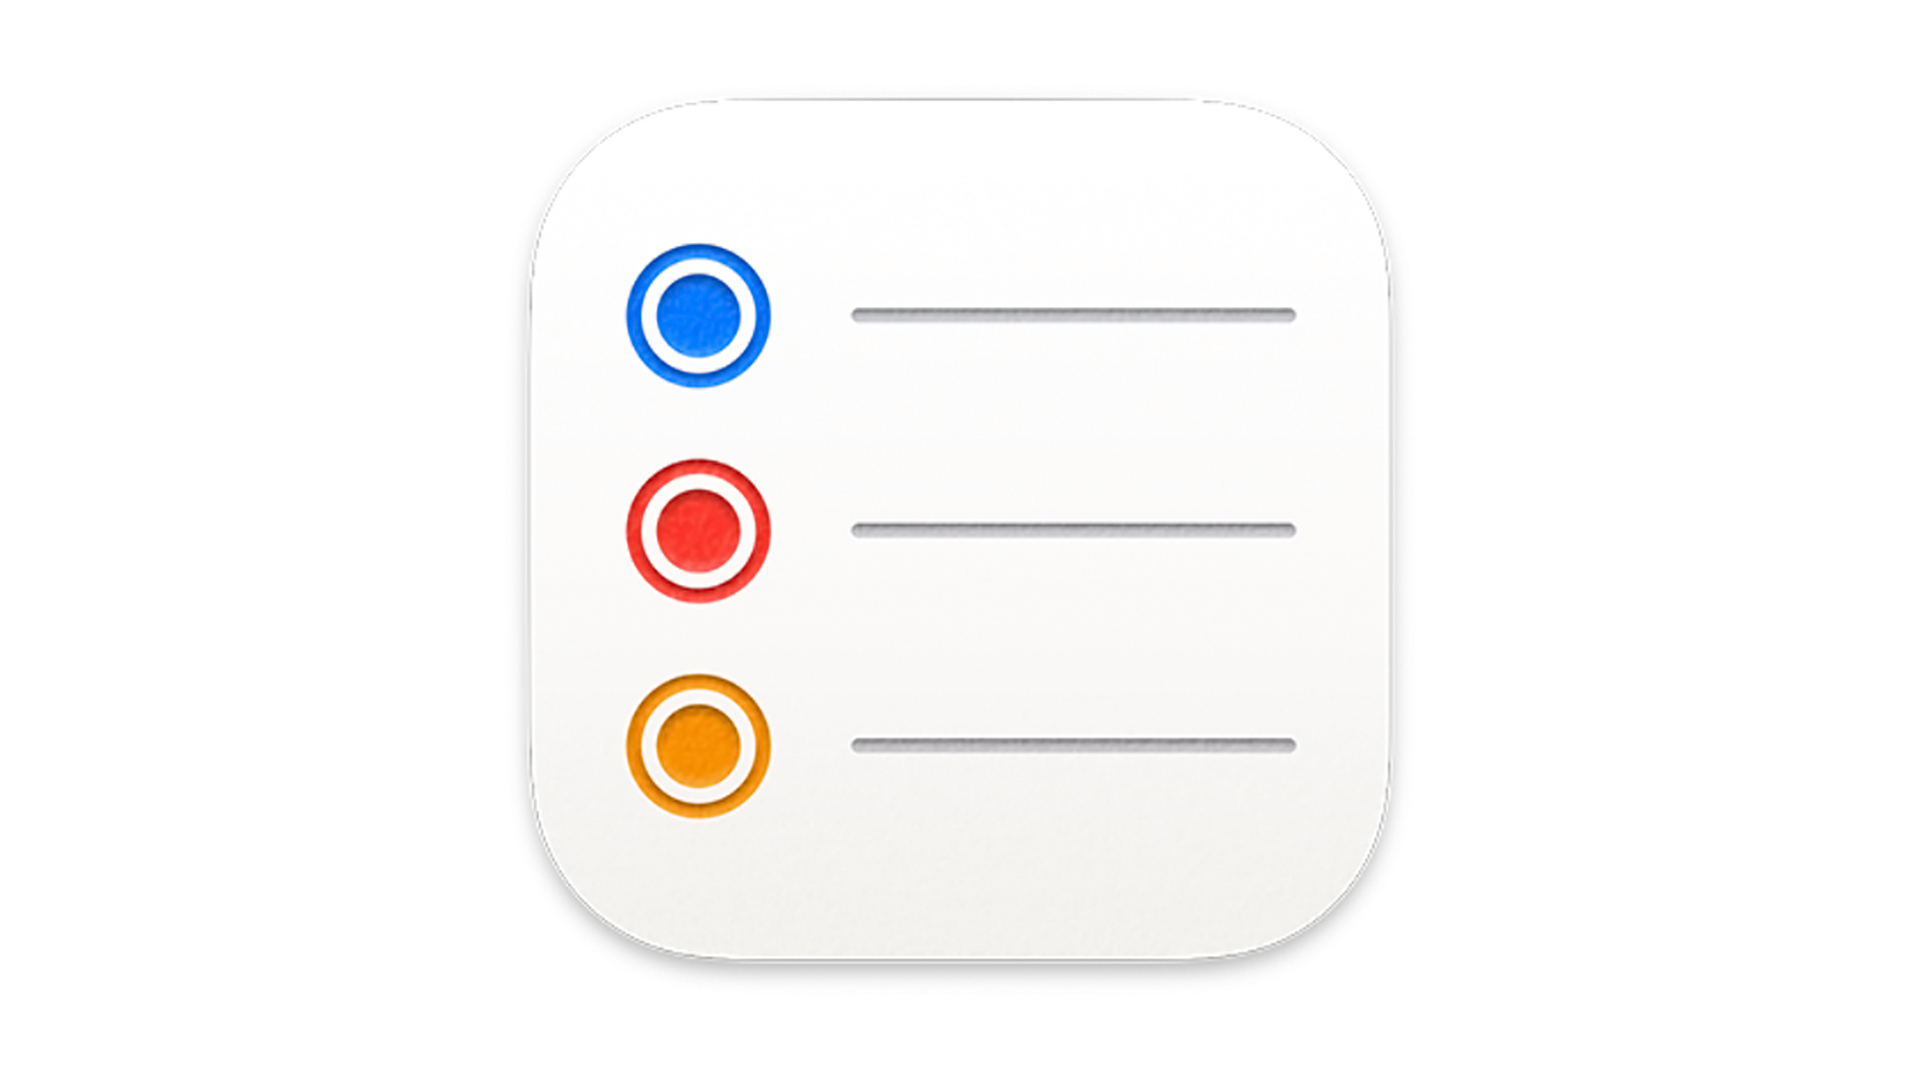 The iPhone Reminders icon